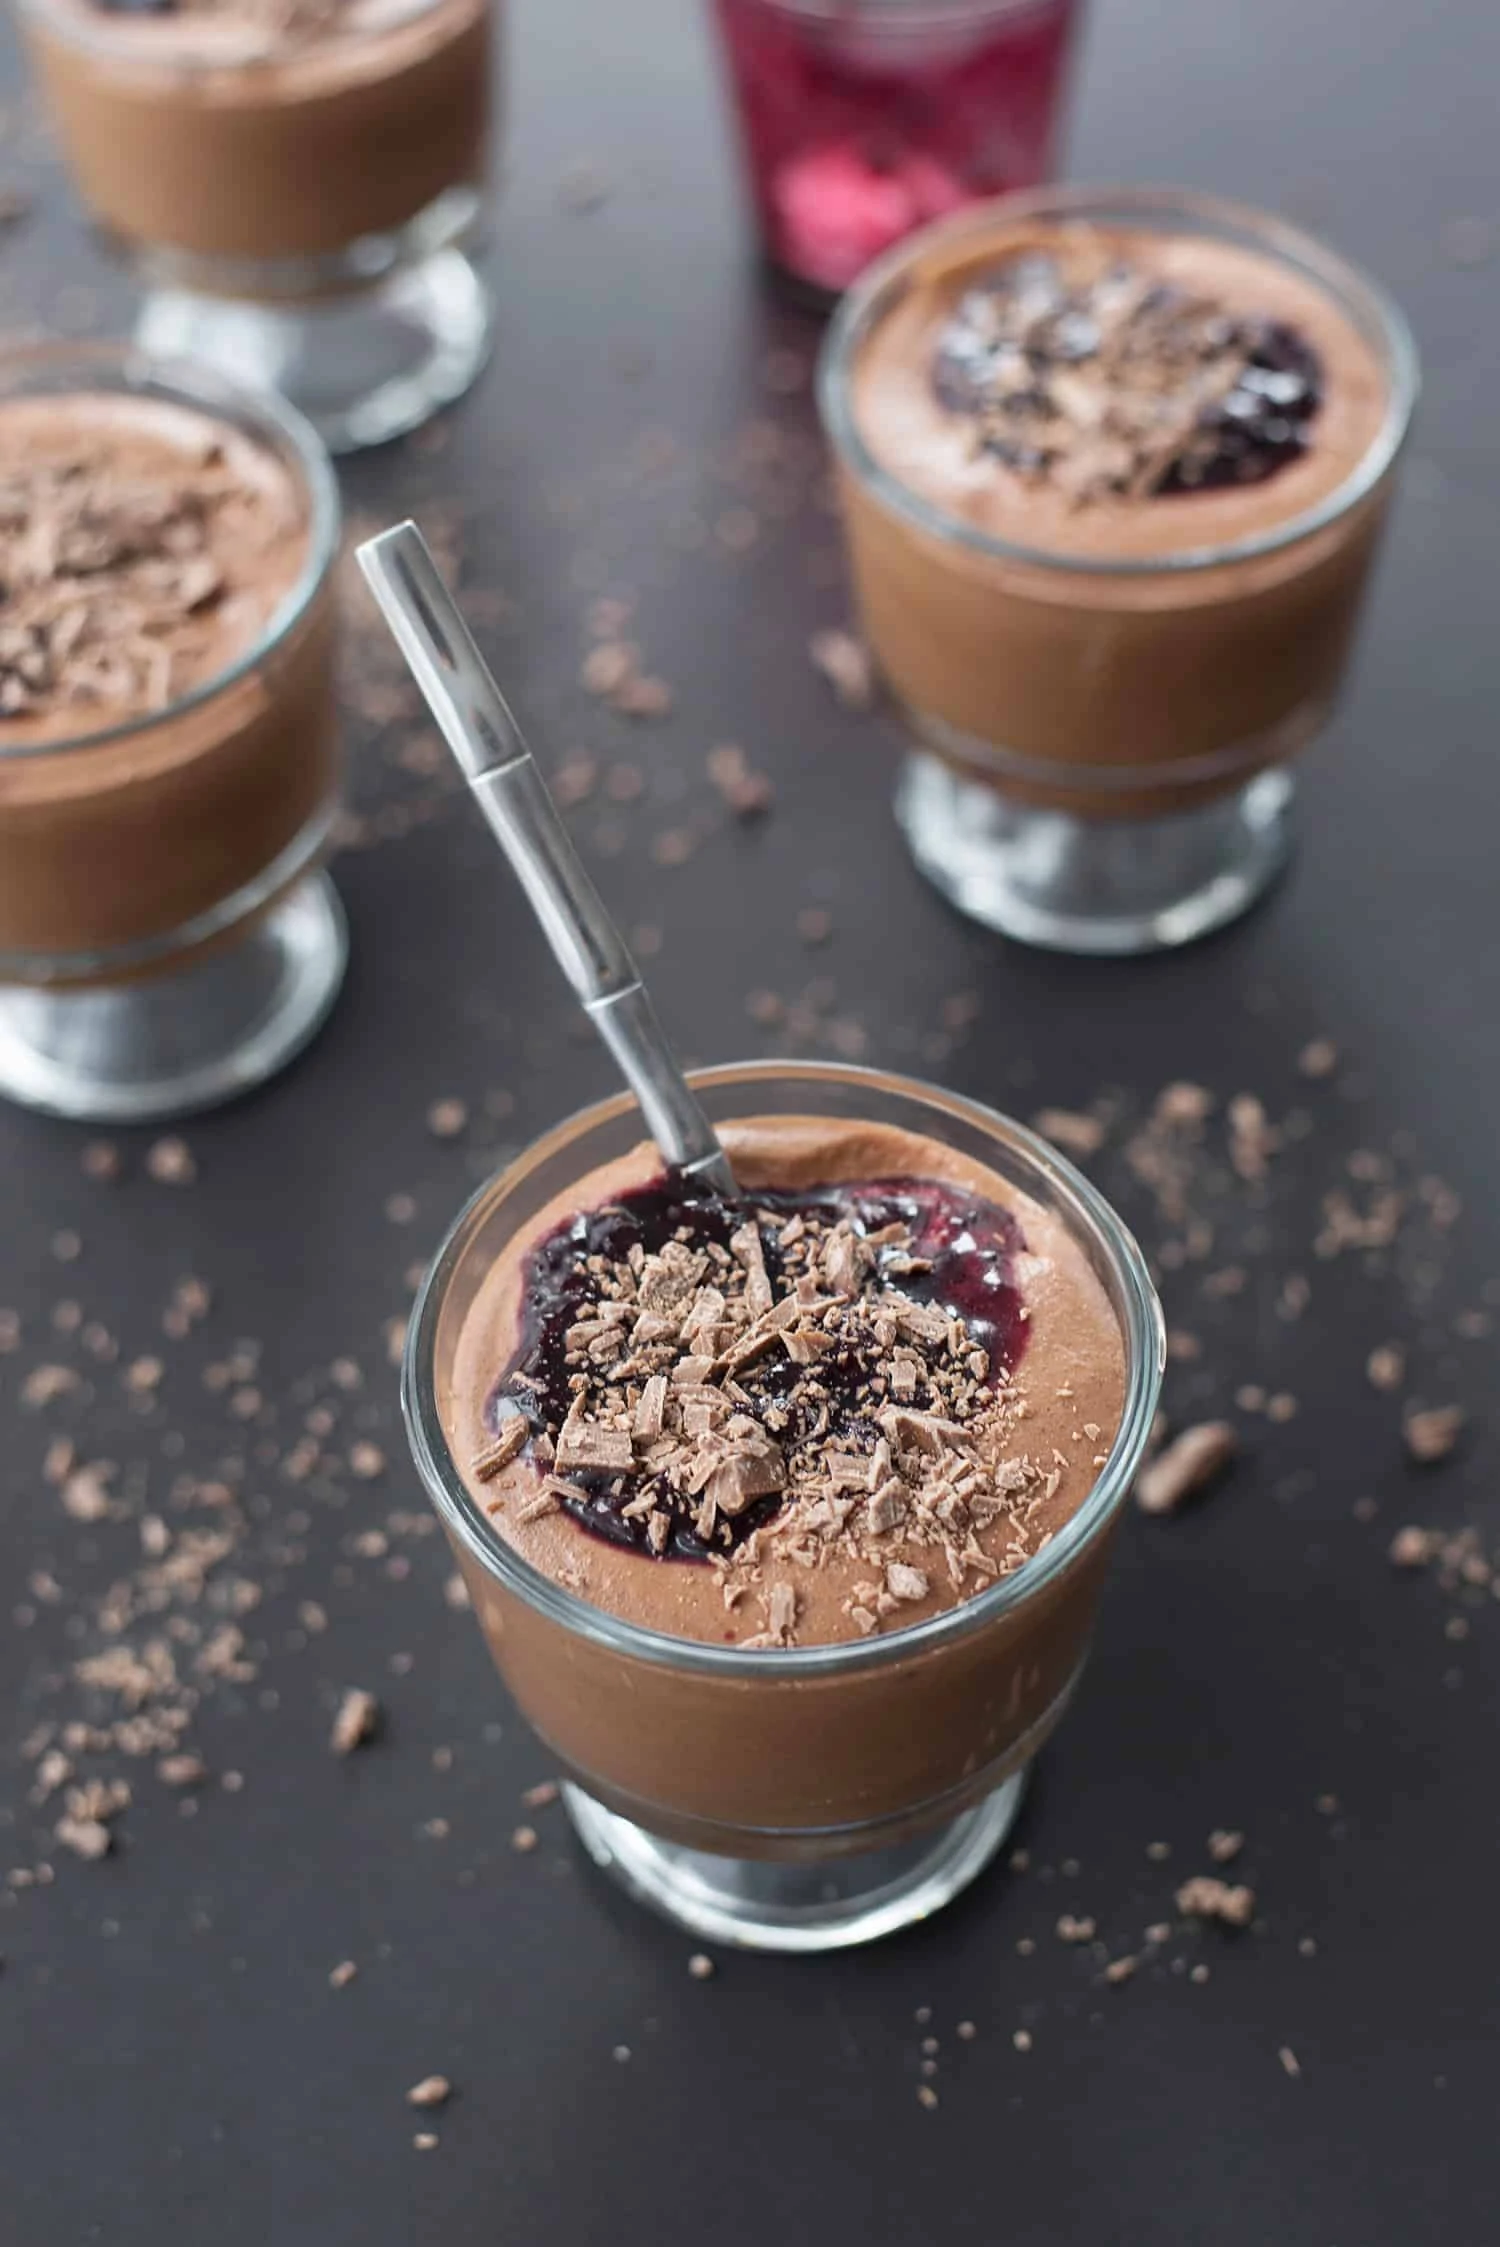 Individual Chocolate Cherry Mousse (Vegan); Part of a round-up collection of recipes compiled by Jane Bonacci, The Heritage Cook, 15 Chocolate Desserts for your Holiday Table. 